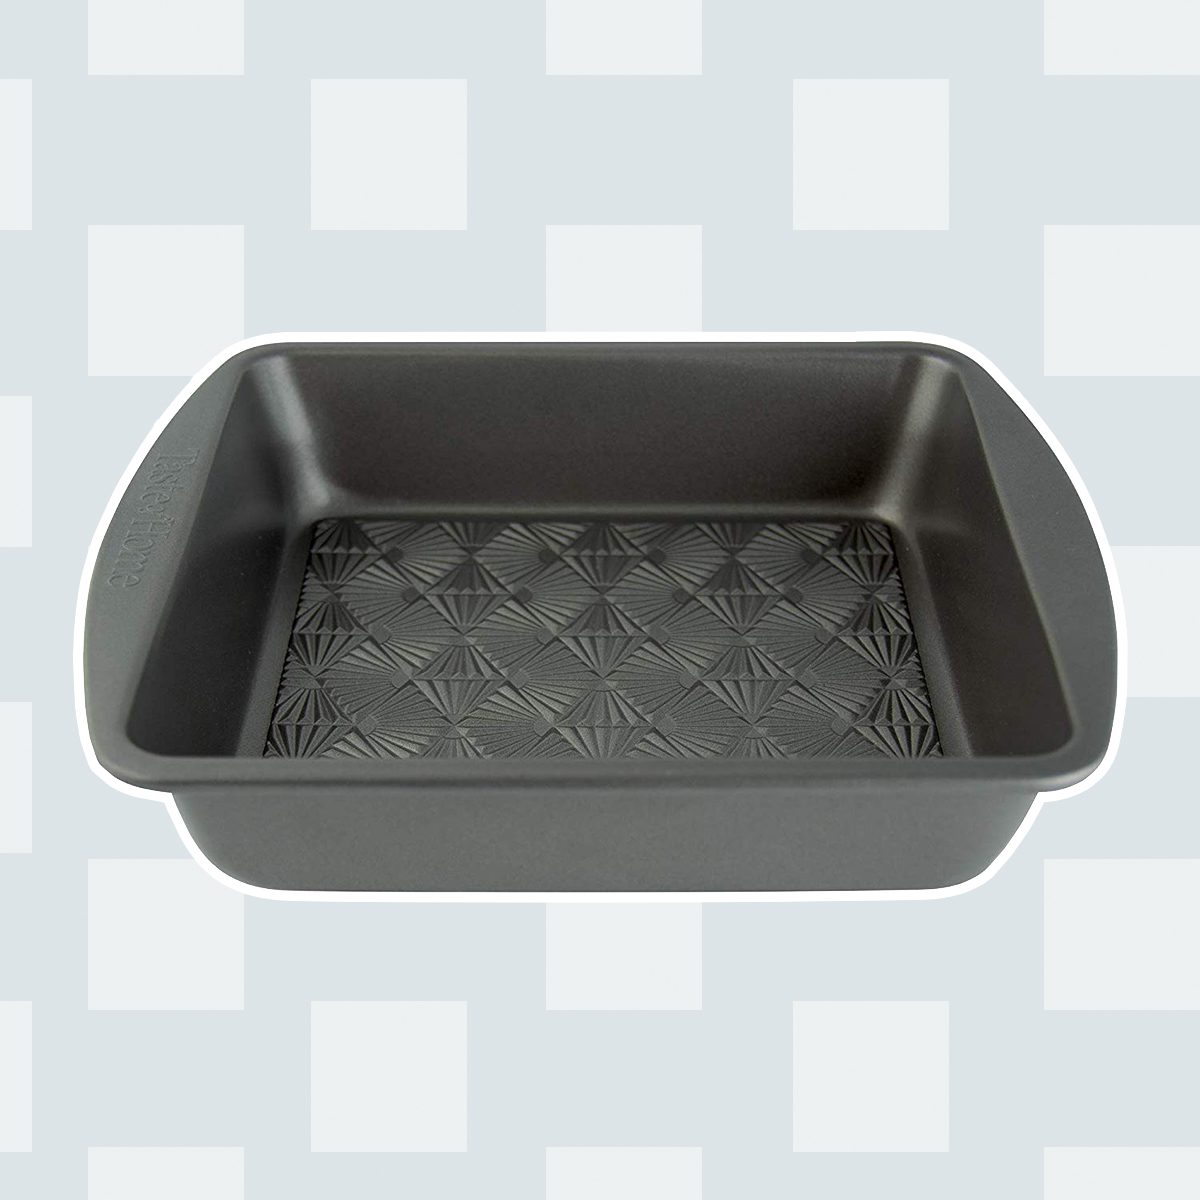 Anything But Square: 8x8 Pans You'll Love